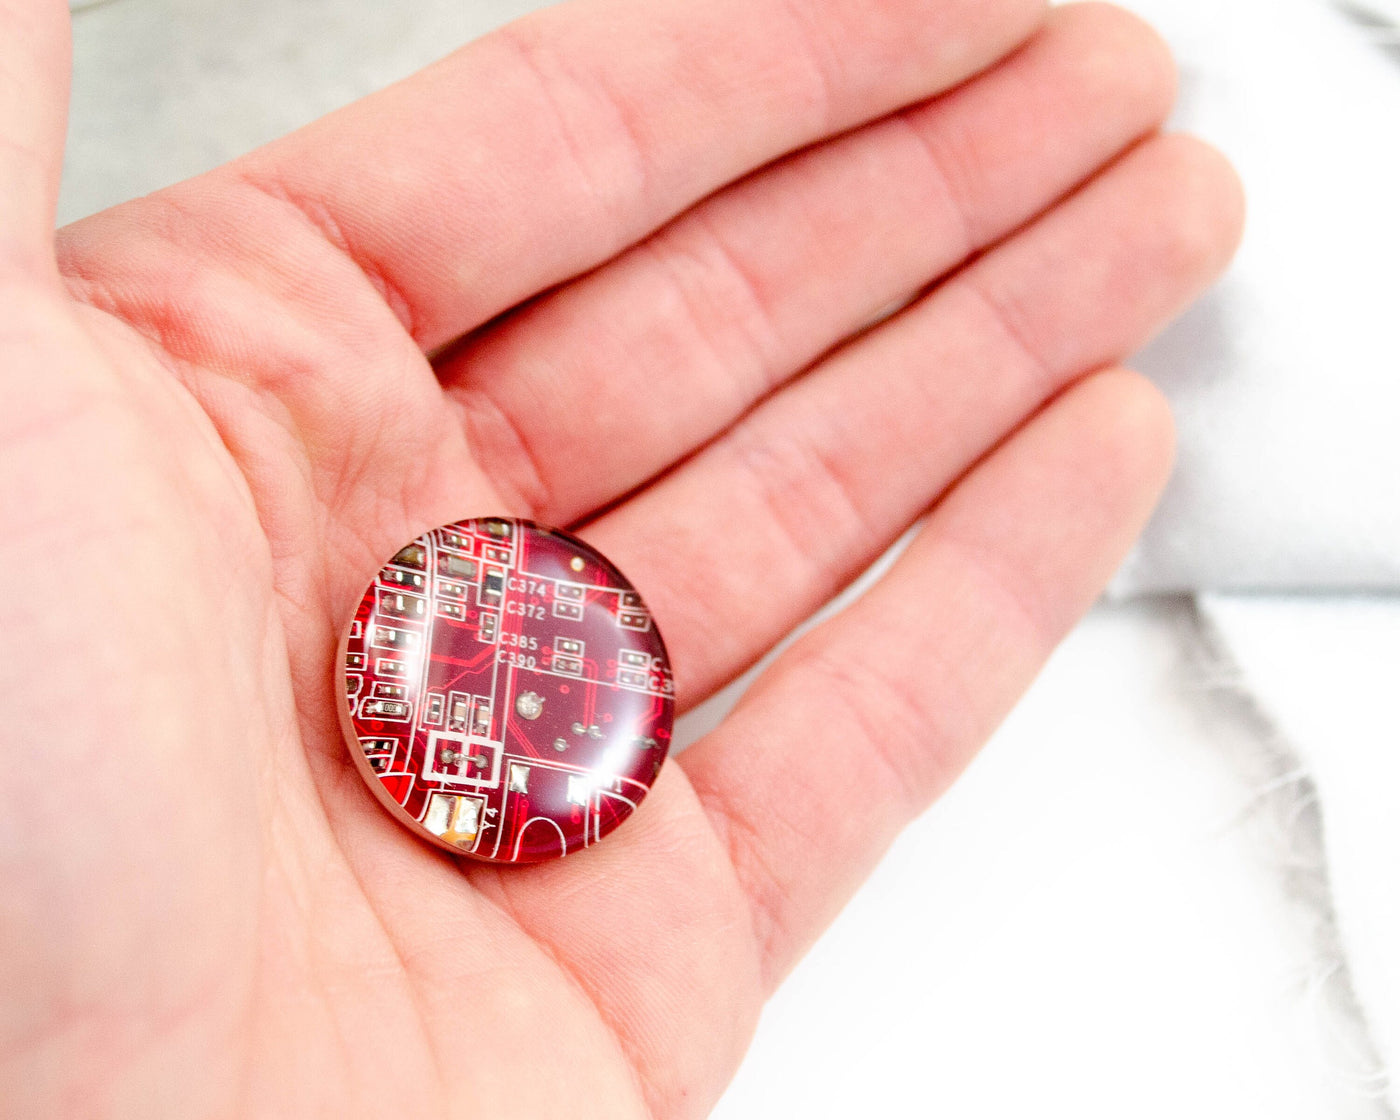 Red Circuit Board Pin, Recycled Computer Gift, Electronics Engineer Gift, Upcycled Motherboard Brooch, Scientist Pin